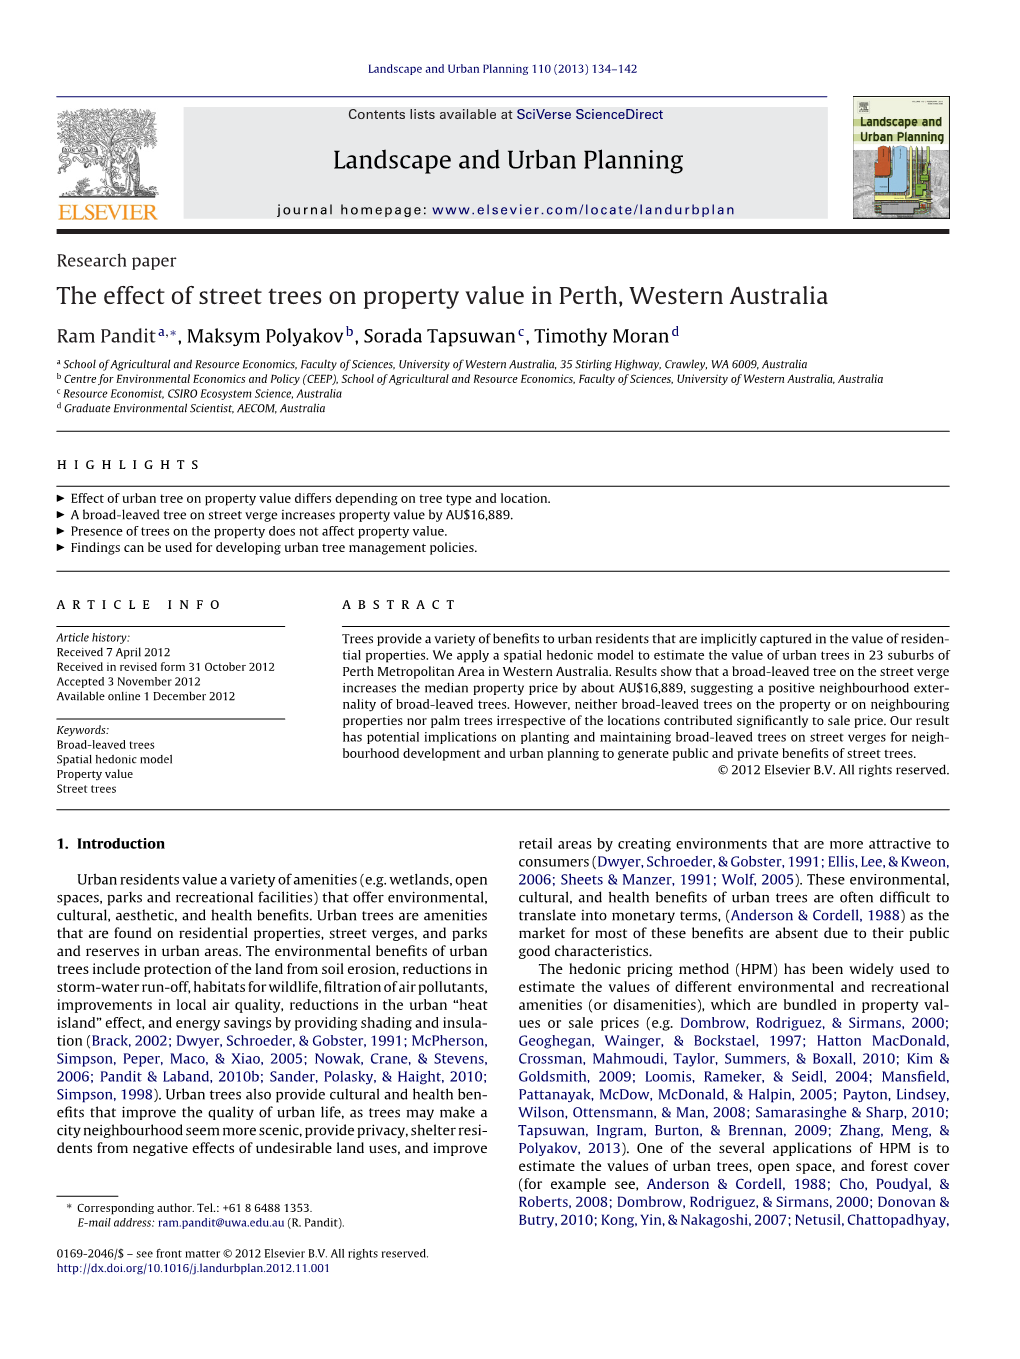 The Effect of Street Trees on Property Value in Perth, Western Australia